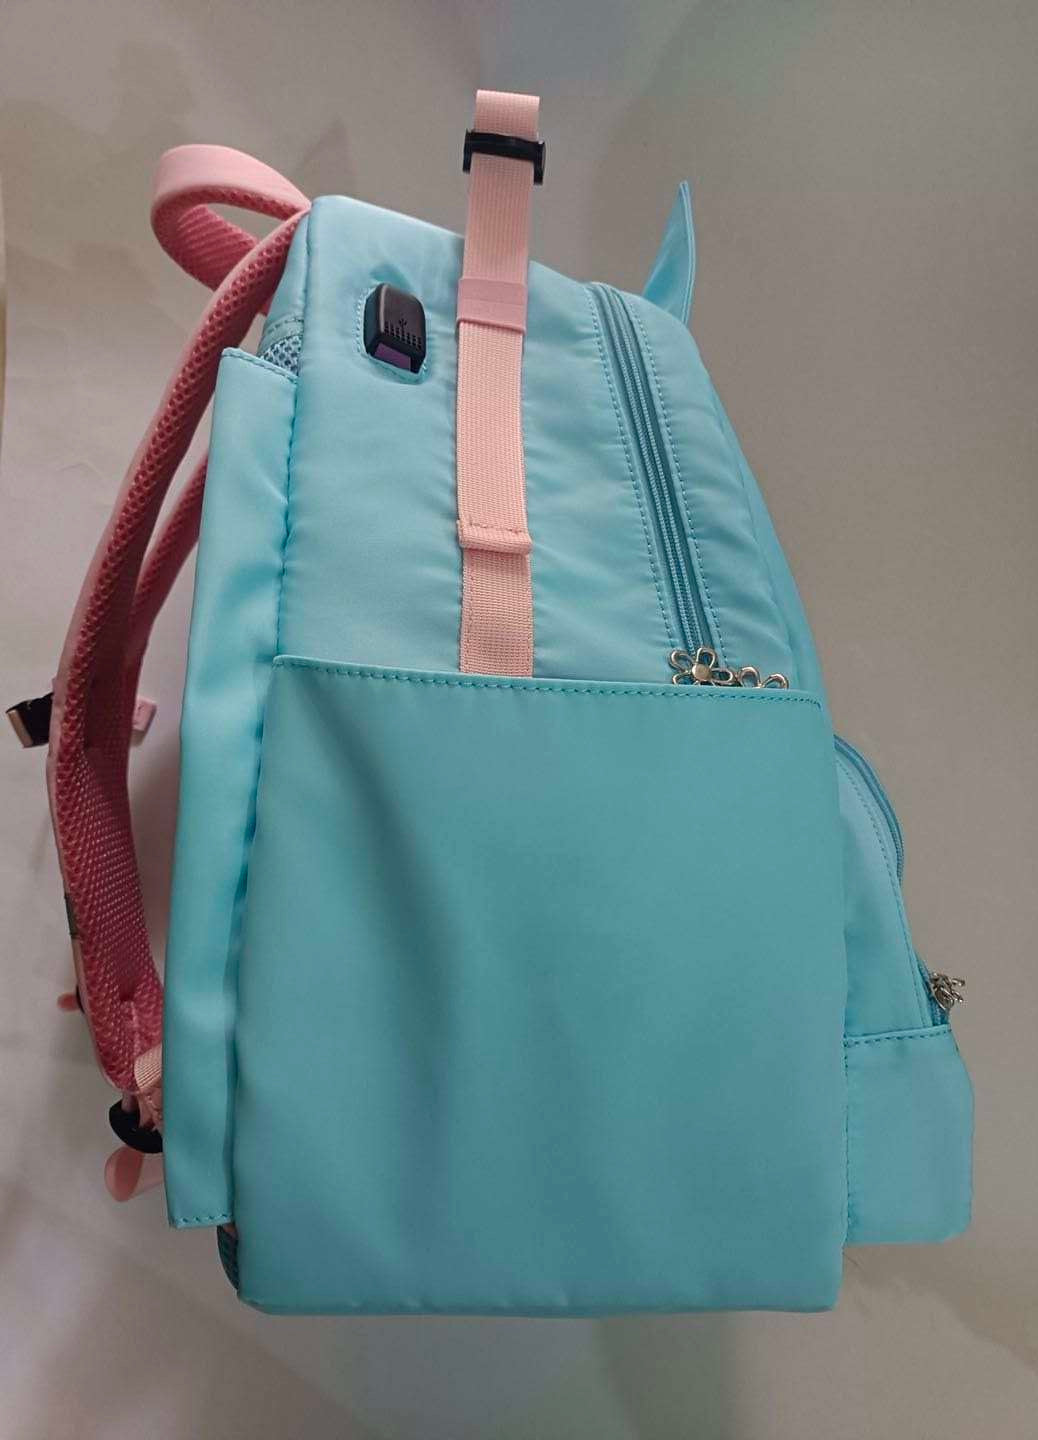 Cat Ita Backpack (Available in various colors)